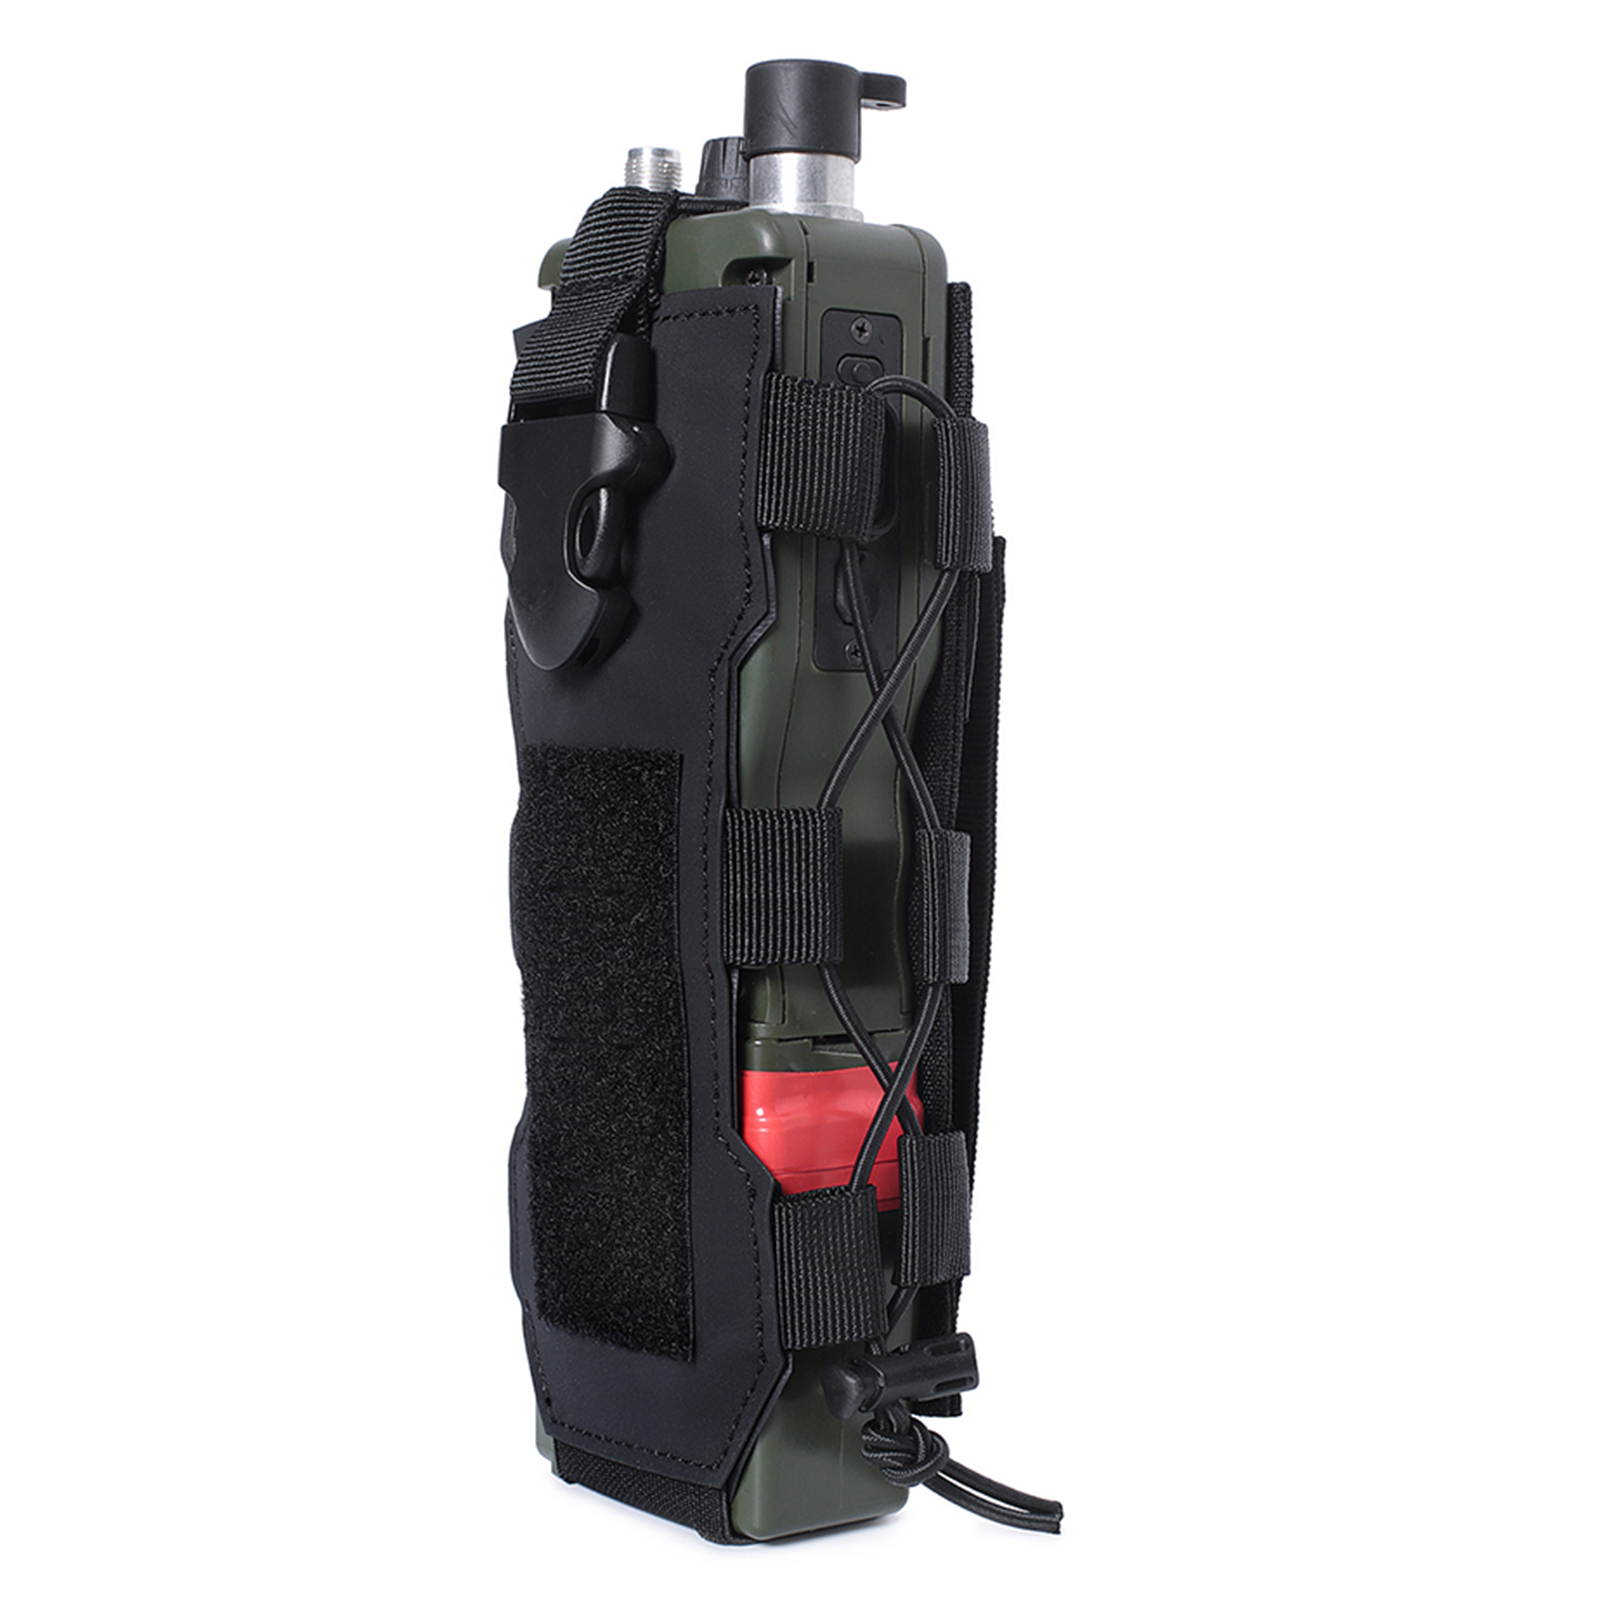 Tactical Water Bottle Holder Adjustable Outdoor Sports Kettle Carrier Pouch For Backpack For Backpack Bicycle Belt Straps